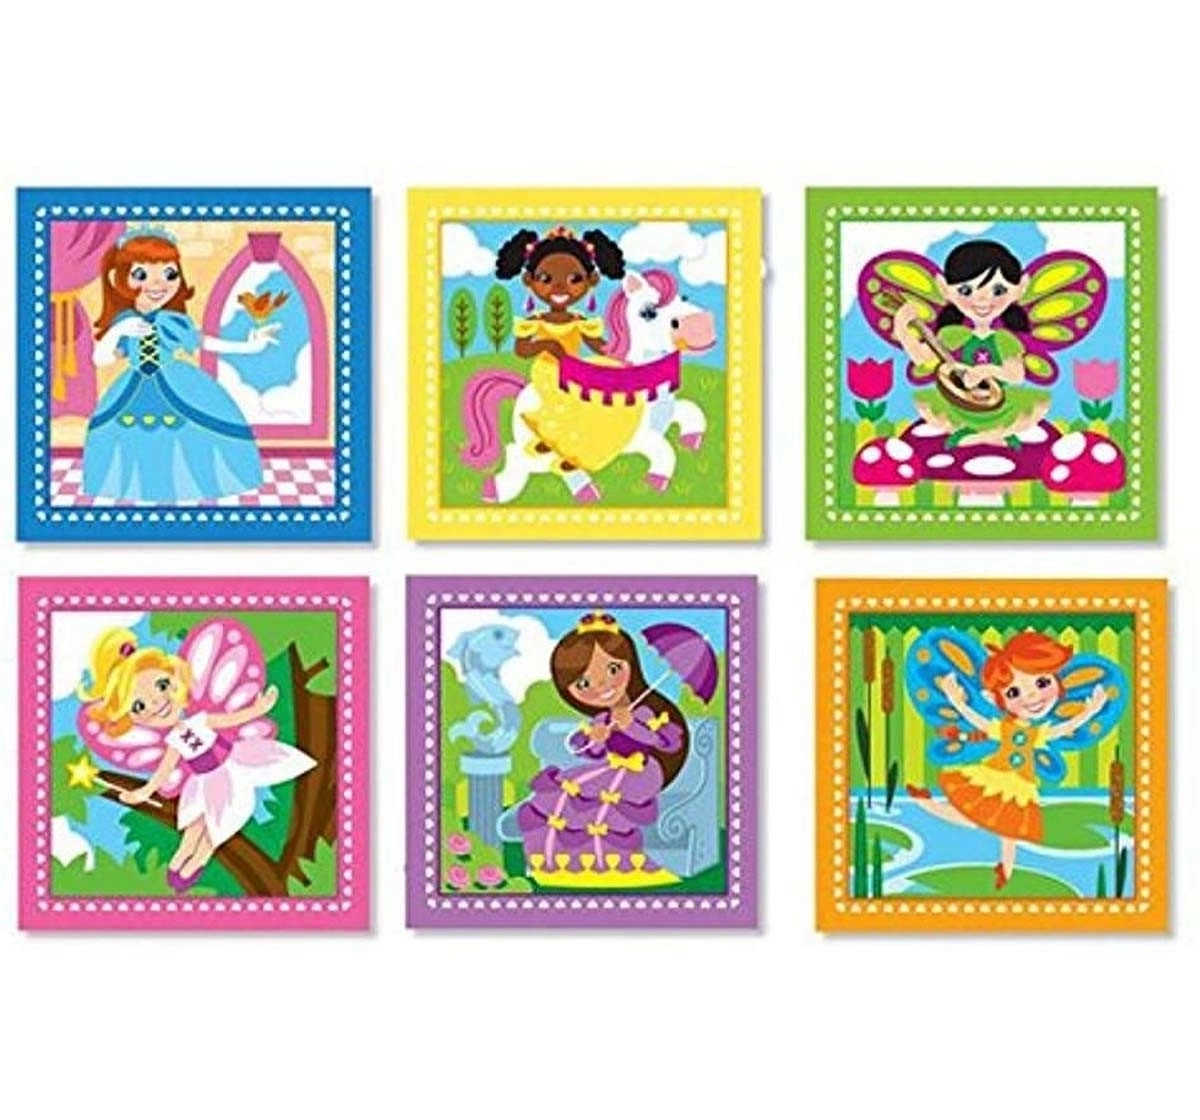 Melissa & Doug Princess And Fairy Cube Puzzle Diy Art & Craft Kits for Kids Age 3Y+